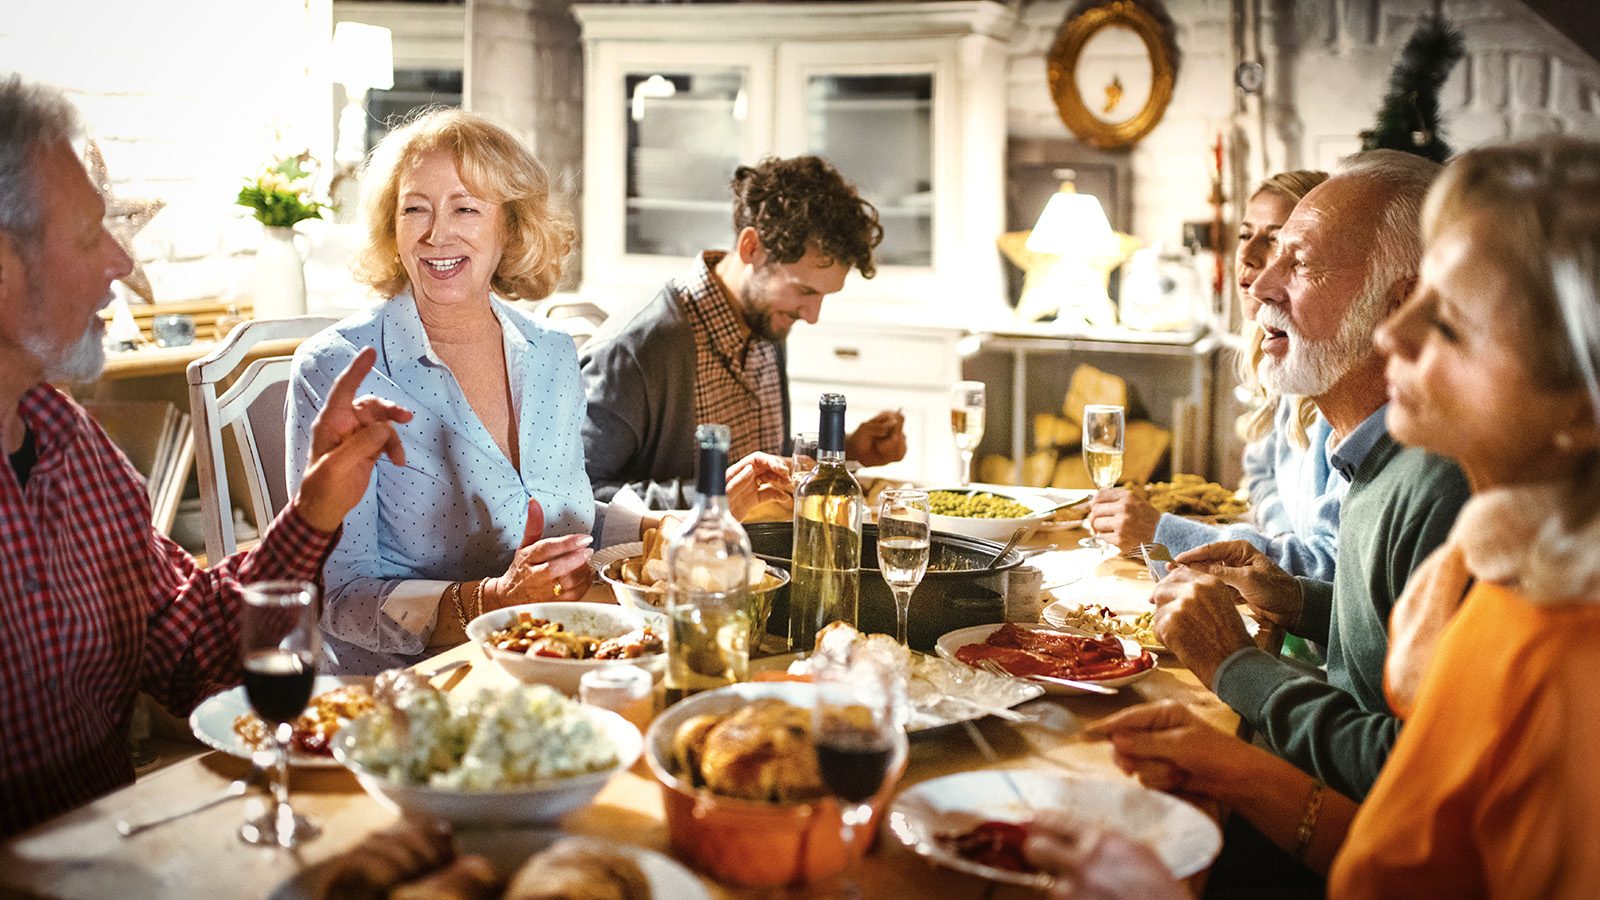 5 Tips for Managing Holiday Eating